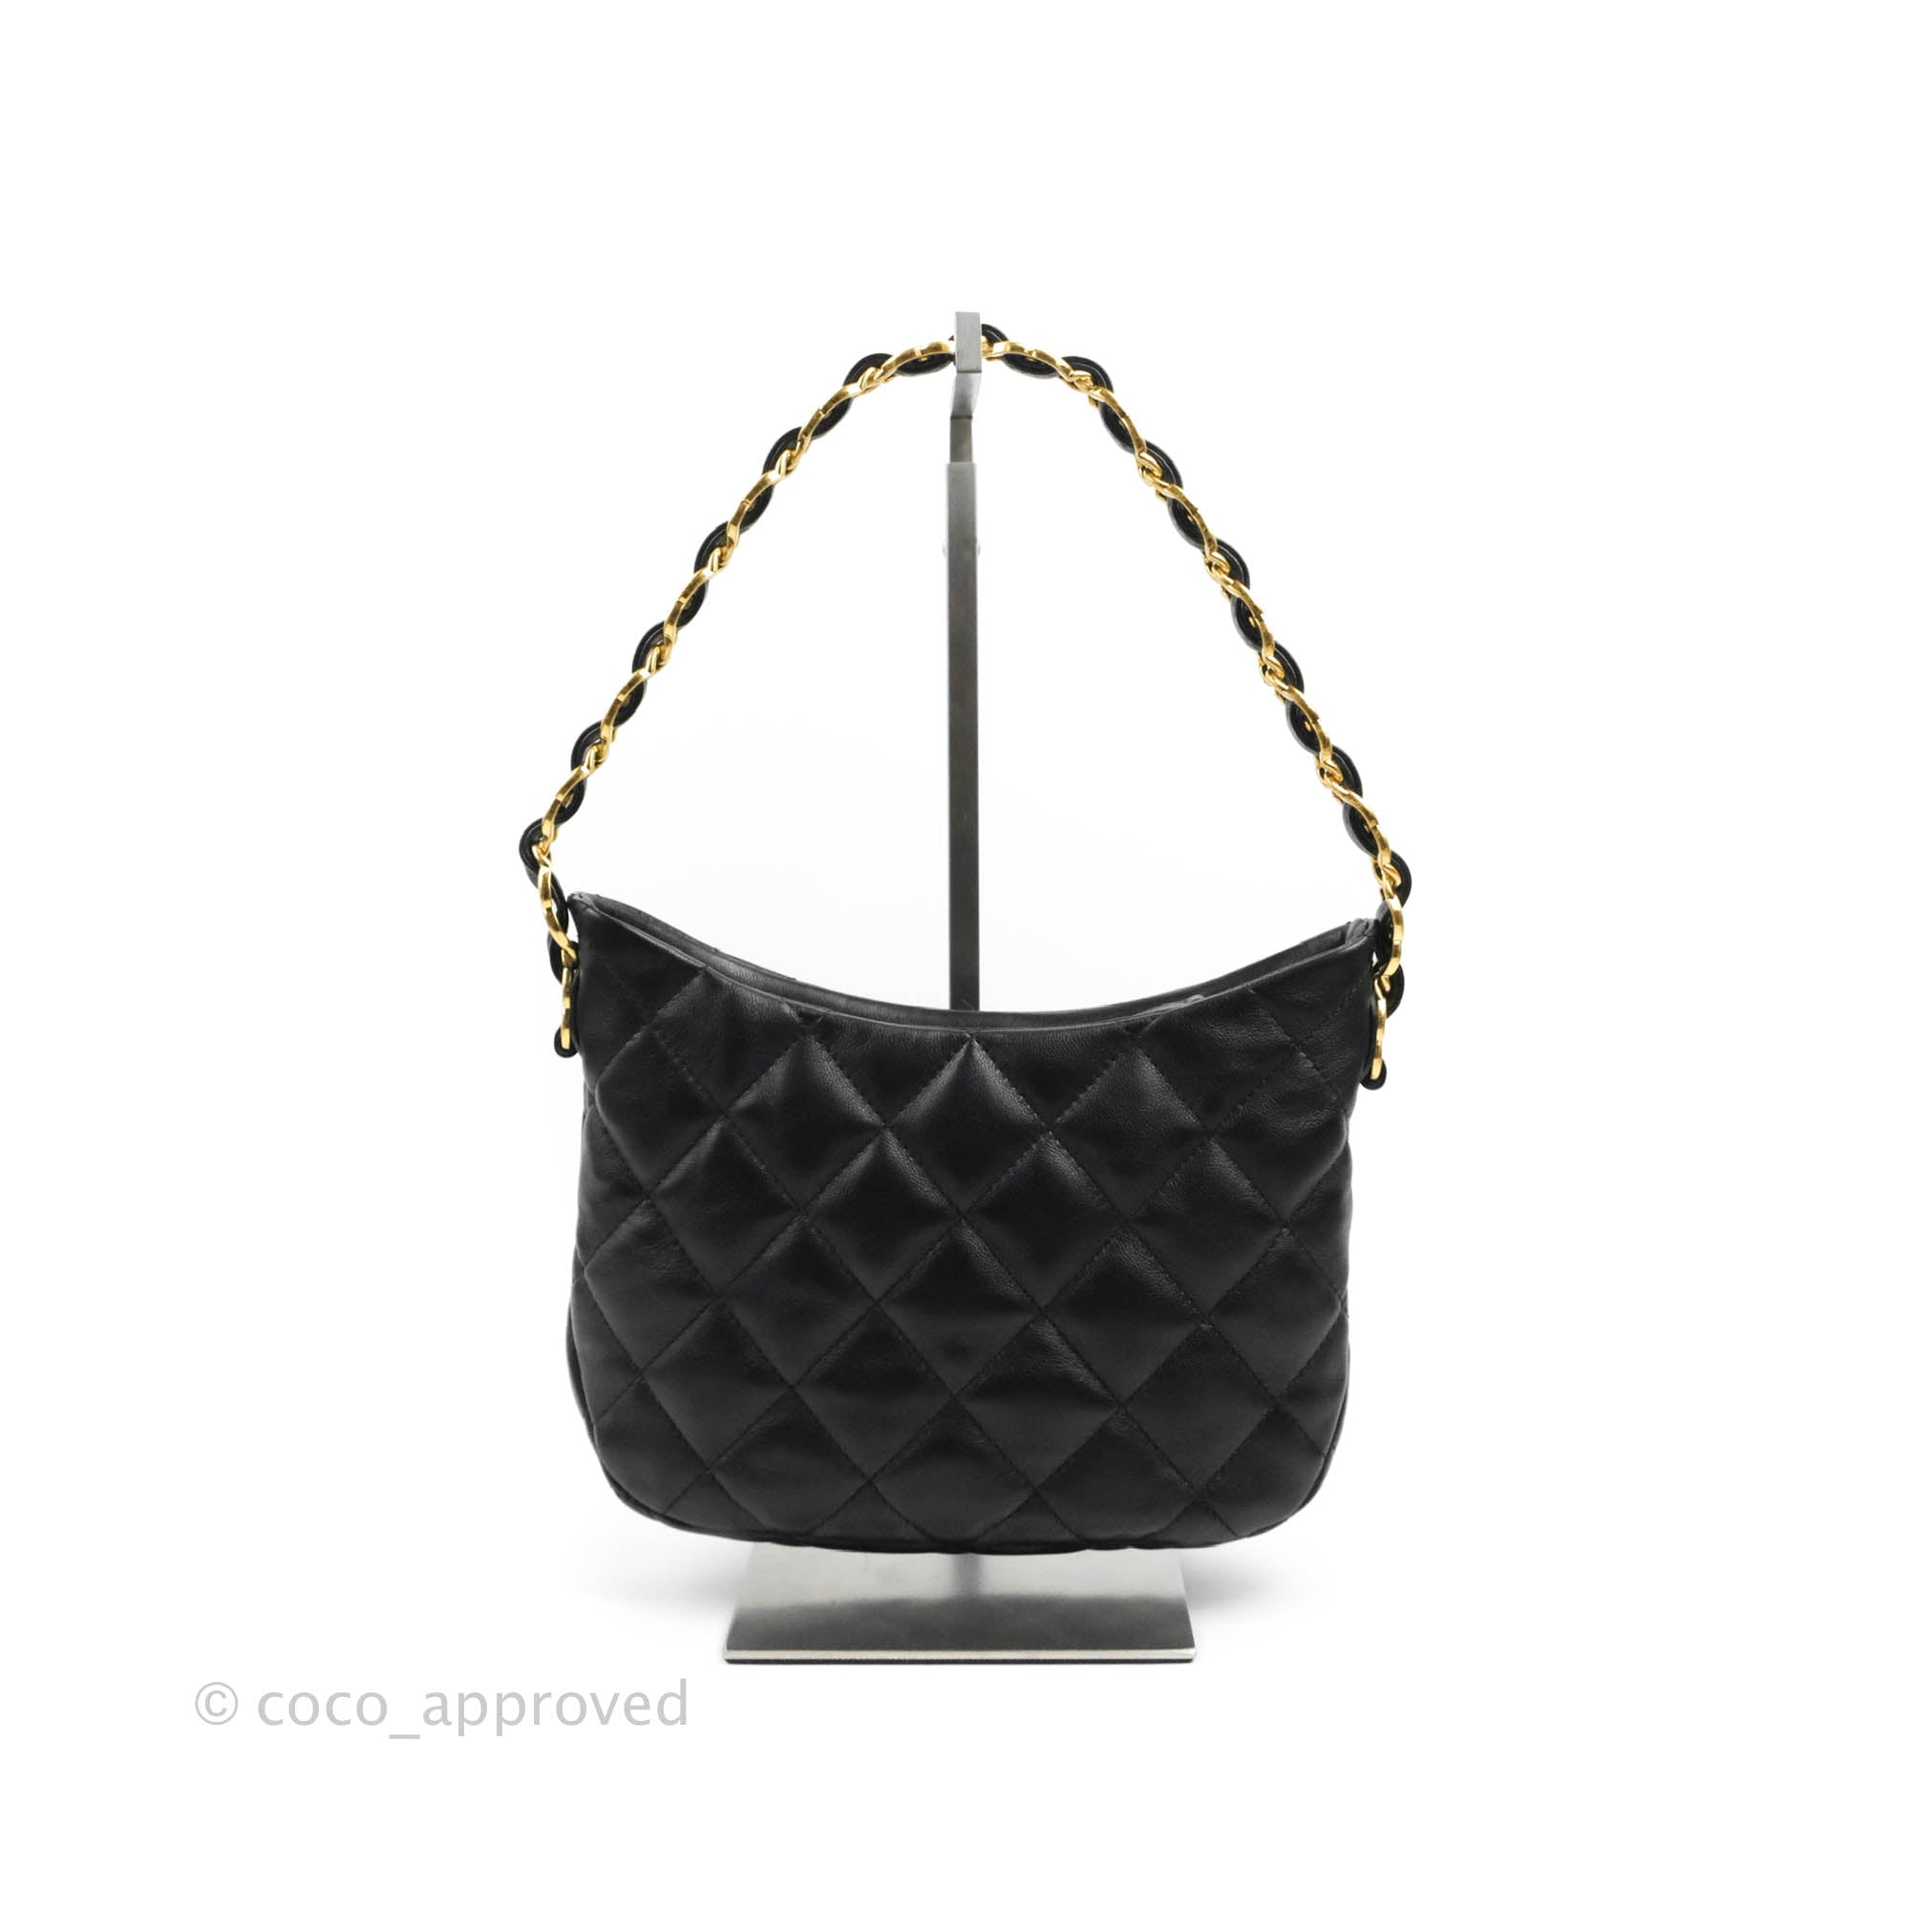 CHANEL, Bags, Chanel Chain Around Quilted Leather Hobo Bag